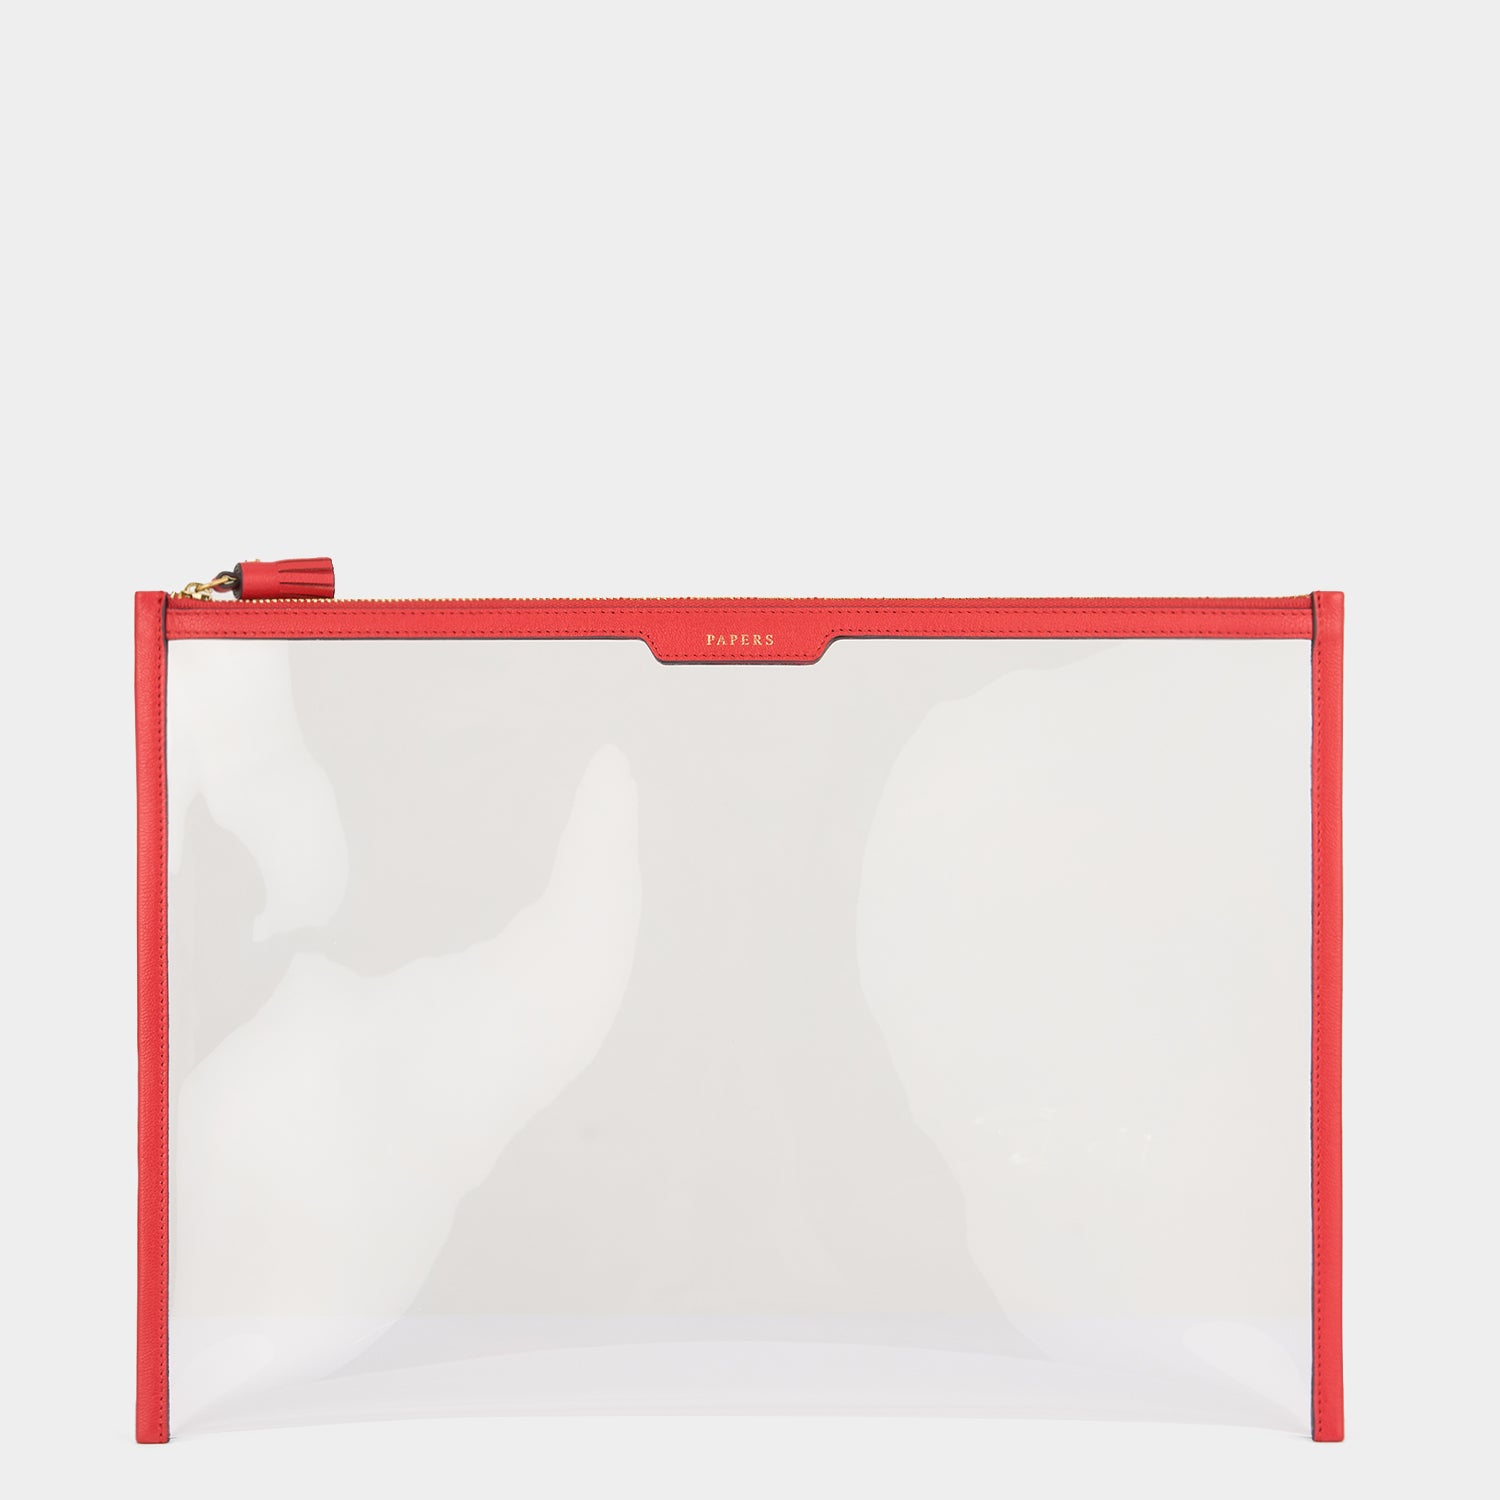 Papers Zip Sleeve -

                  
                    Capra Leather in Salmon/Clear -
                  

                  Anya Hindmarch EU
